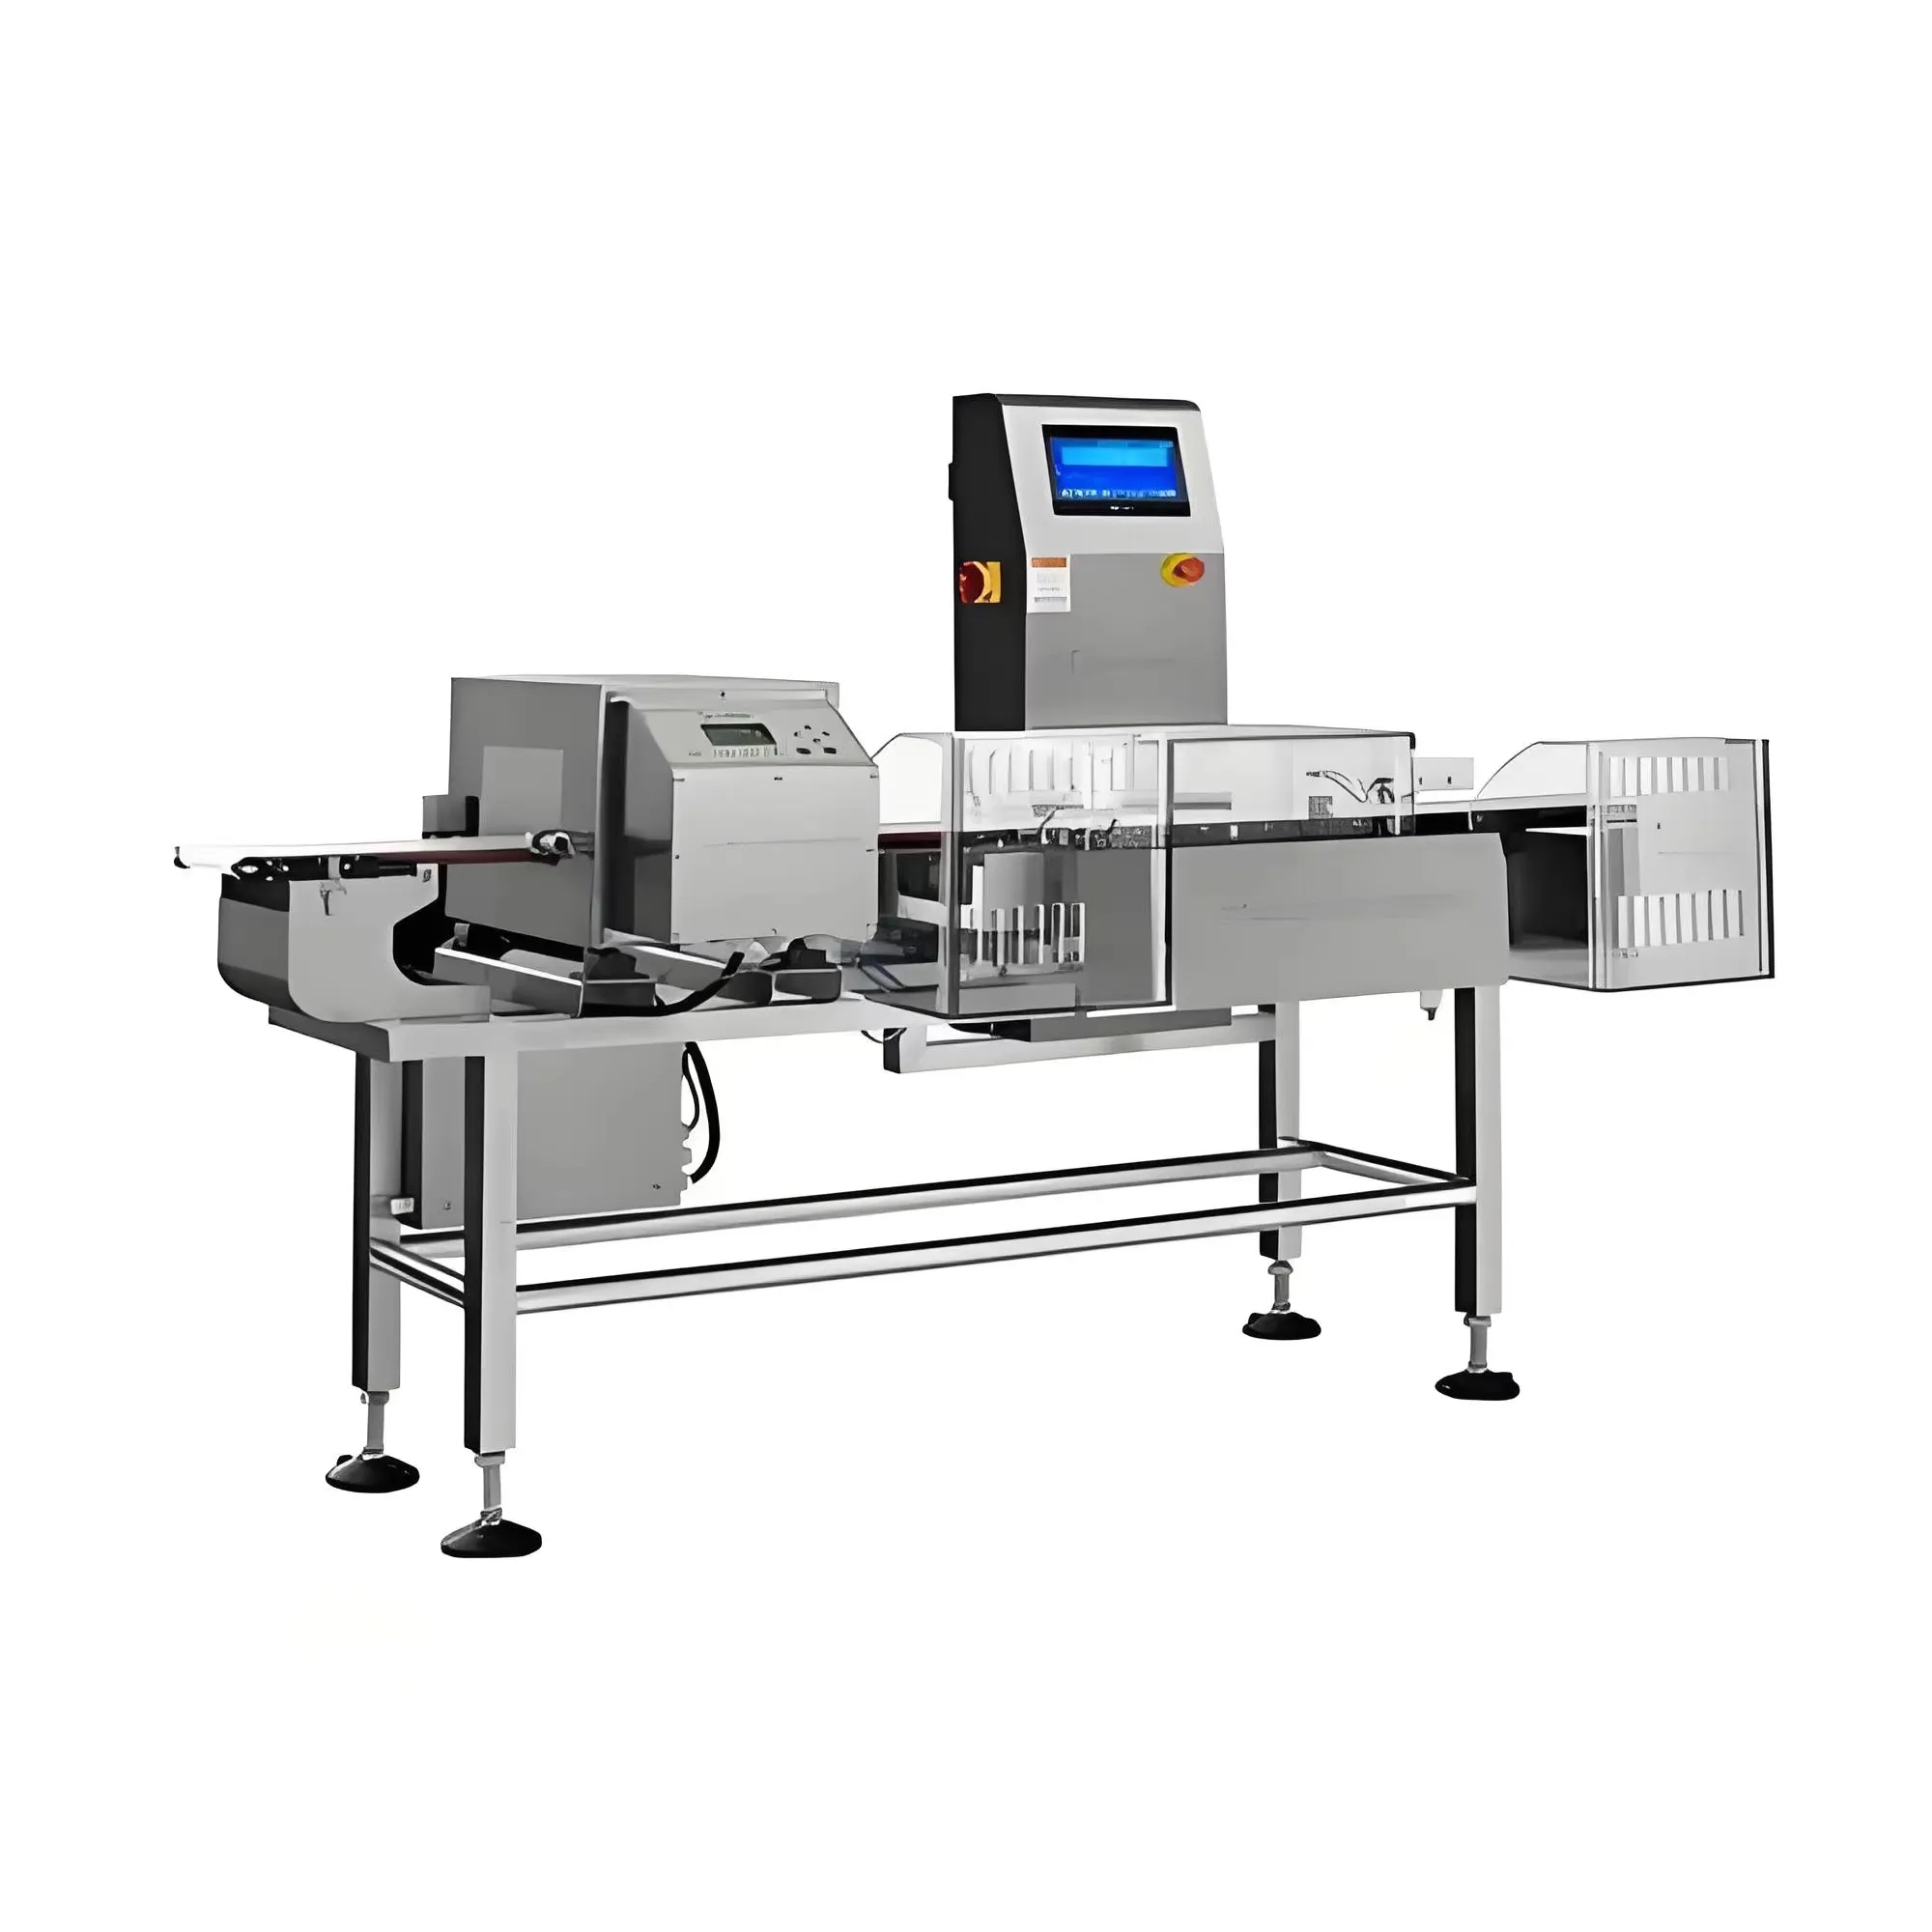 Detector de metales and weighing machine, this machine has two functions: metal detection and product weighing